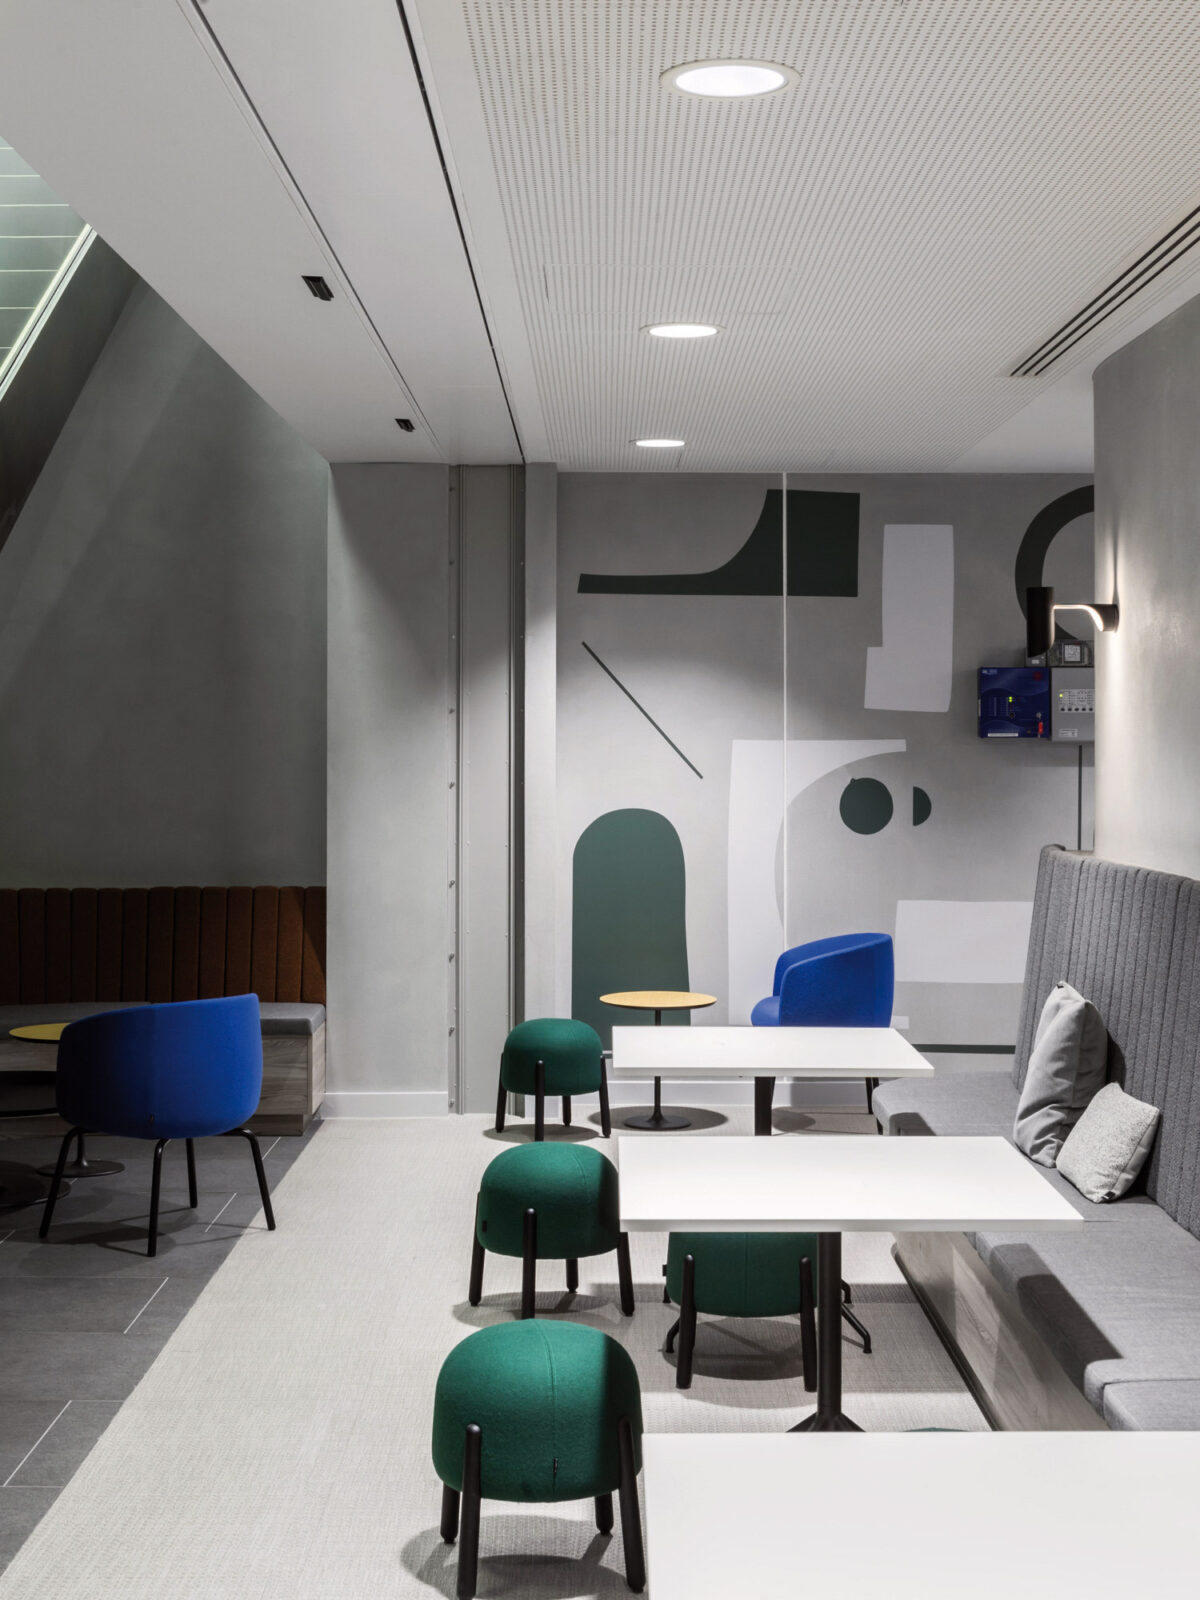 Modern interior space featuring an angular geometric wall mural in muted greens and greys, accented by sleek furniture in contrasting colors, such as blue and green chairs, against a minimalist backdrop. The space combines a play of textures and clean lines, creating a contemporary professional atmosphere.